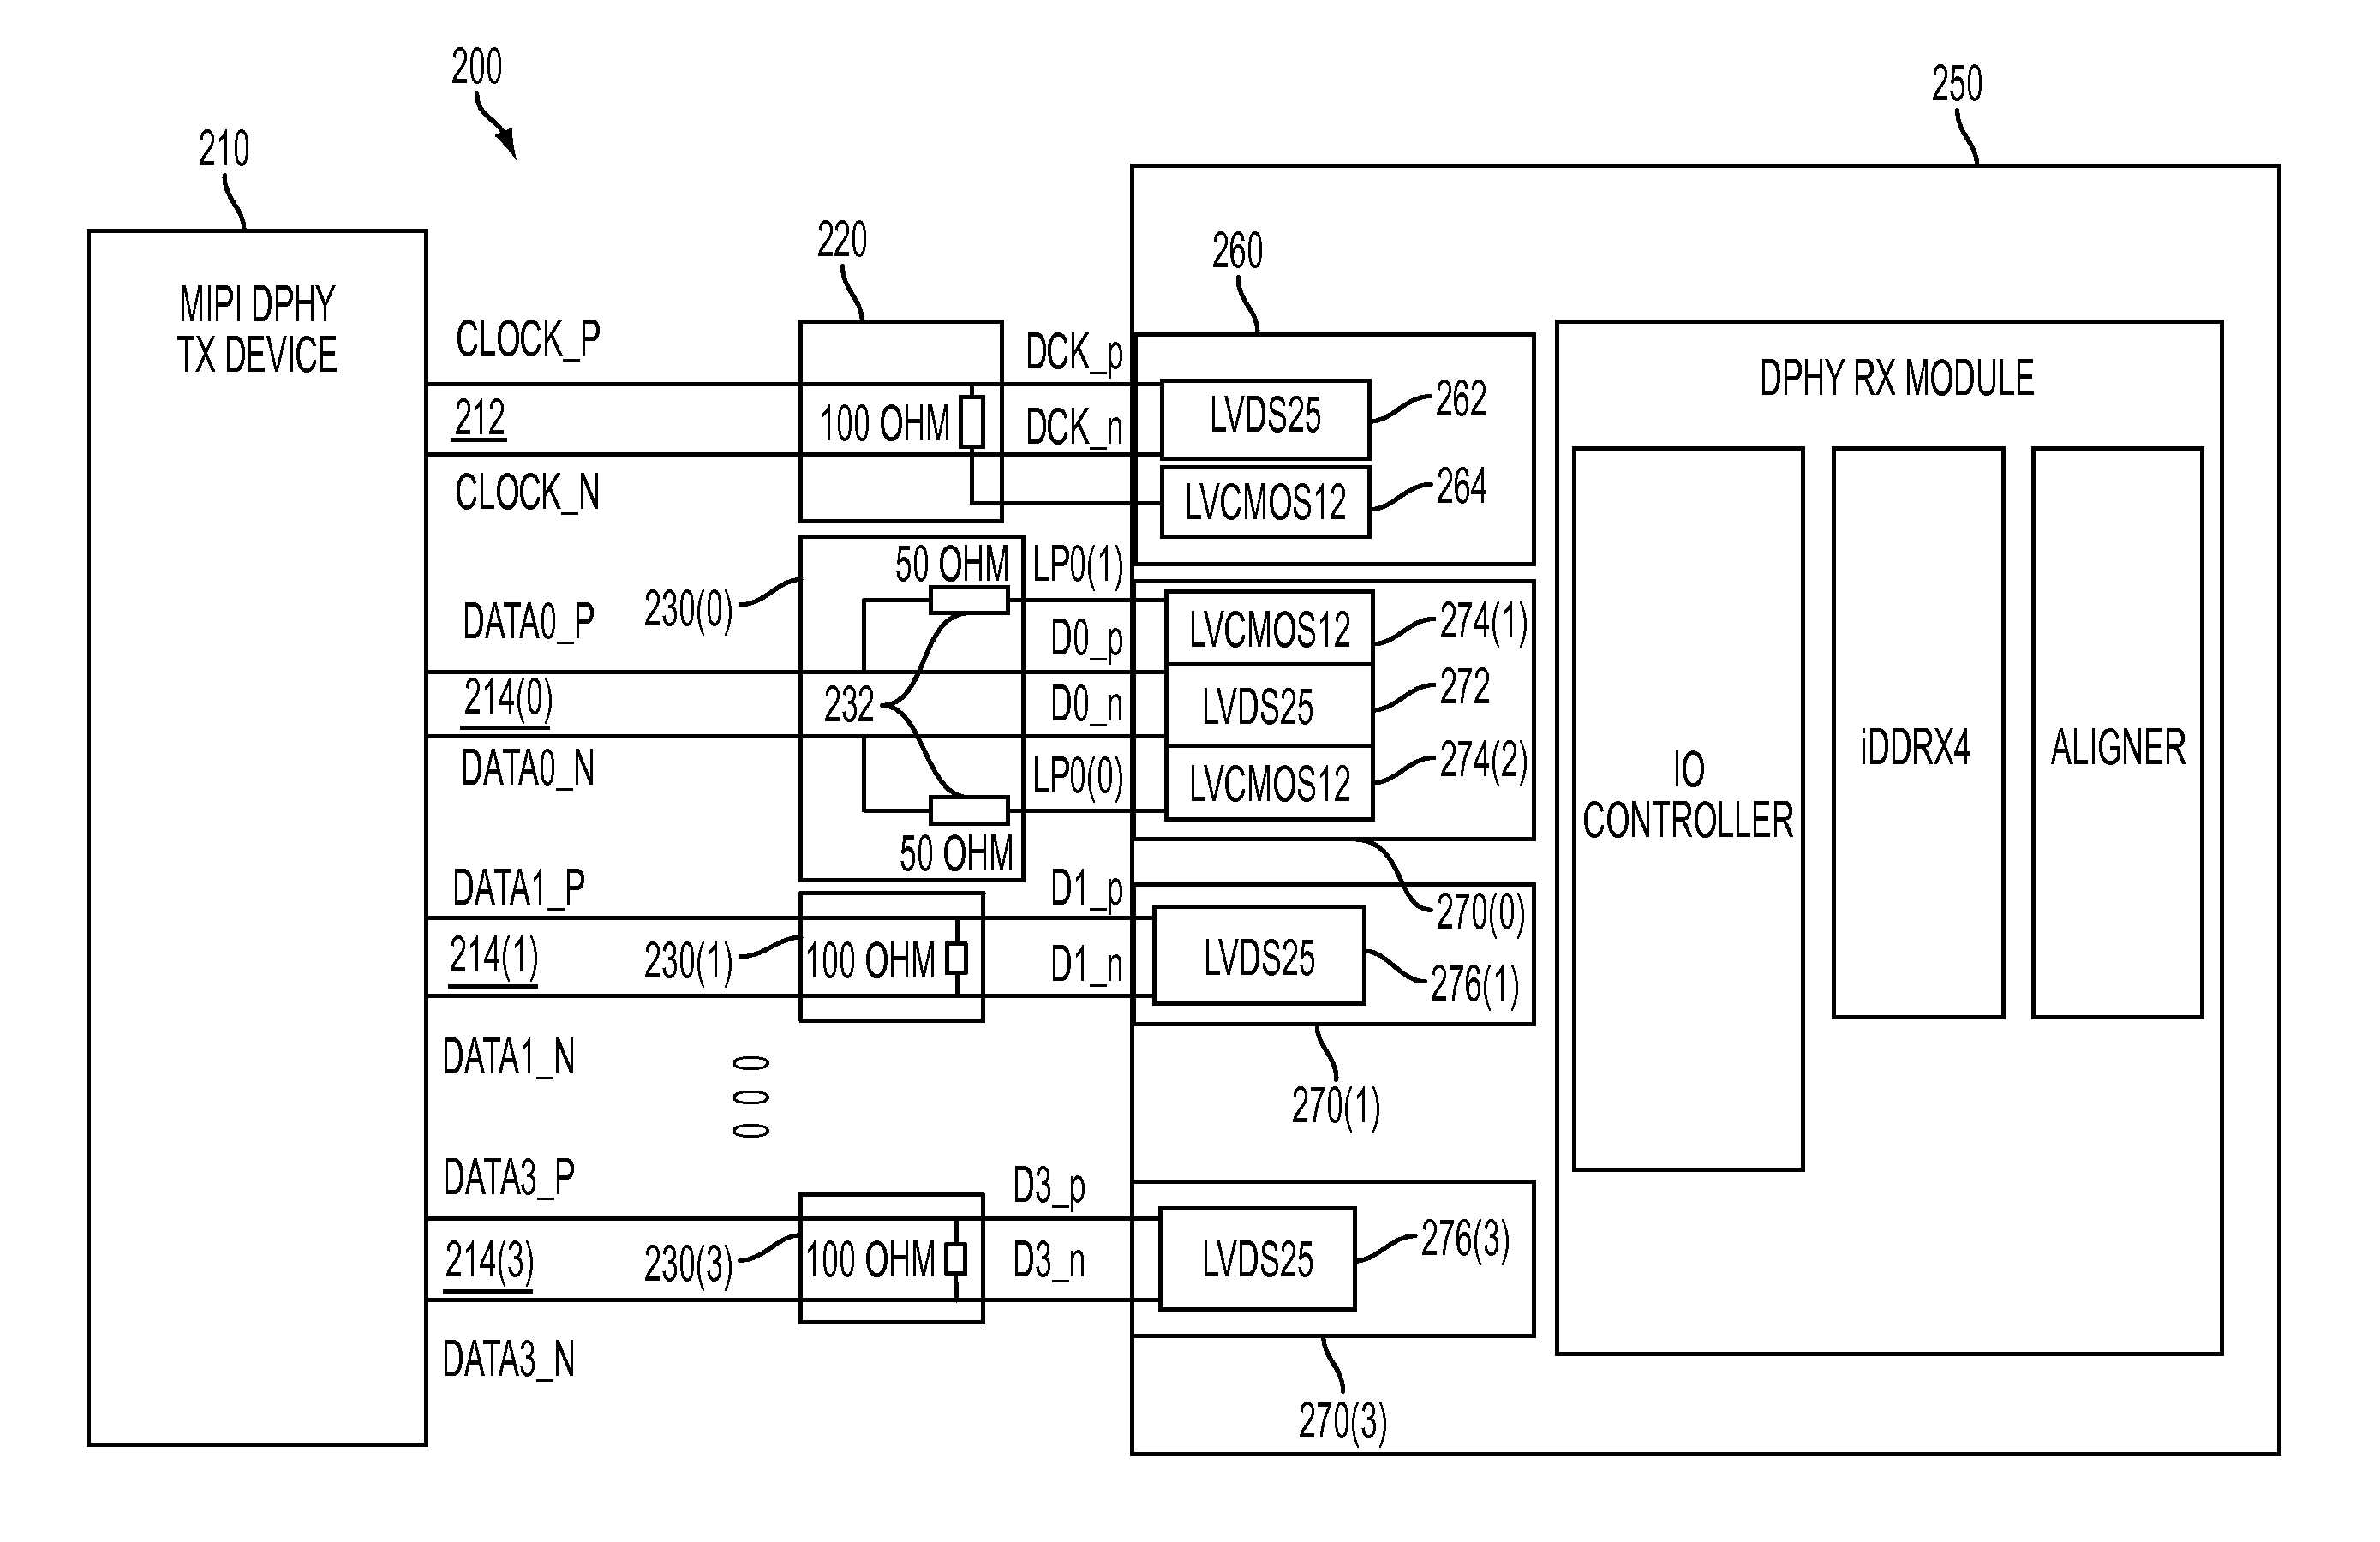 Communicating with MIPI-compliant devices using non-MIPI interfaces